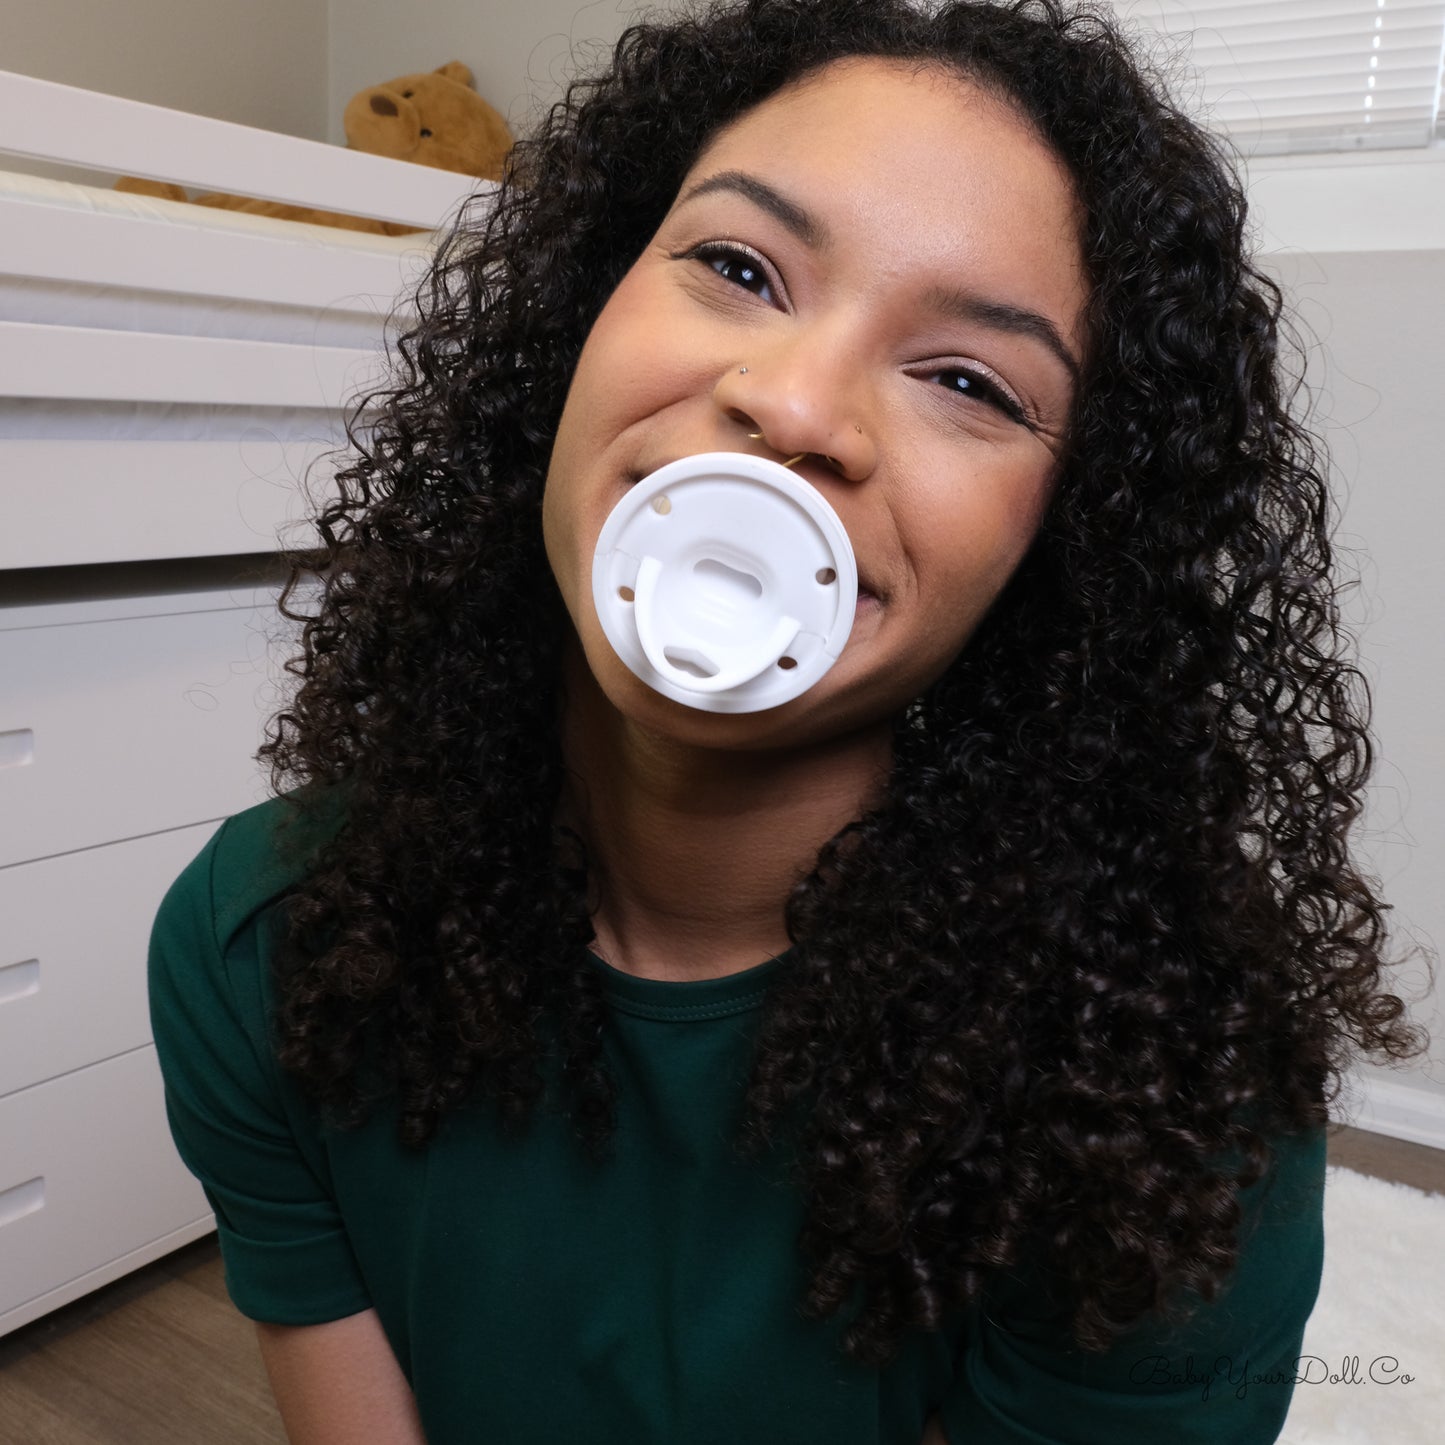 White Button Soother | Pacifier